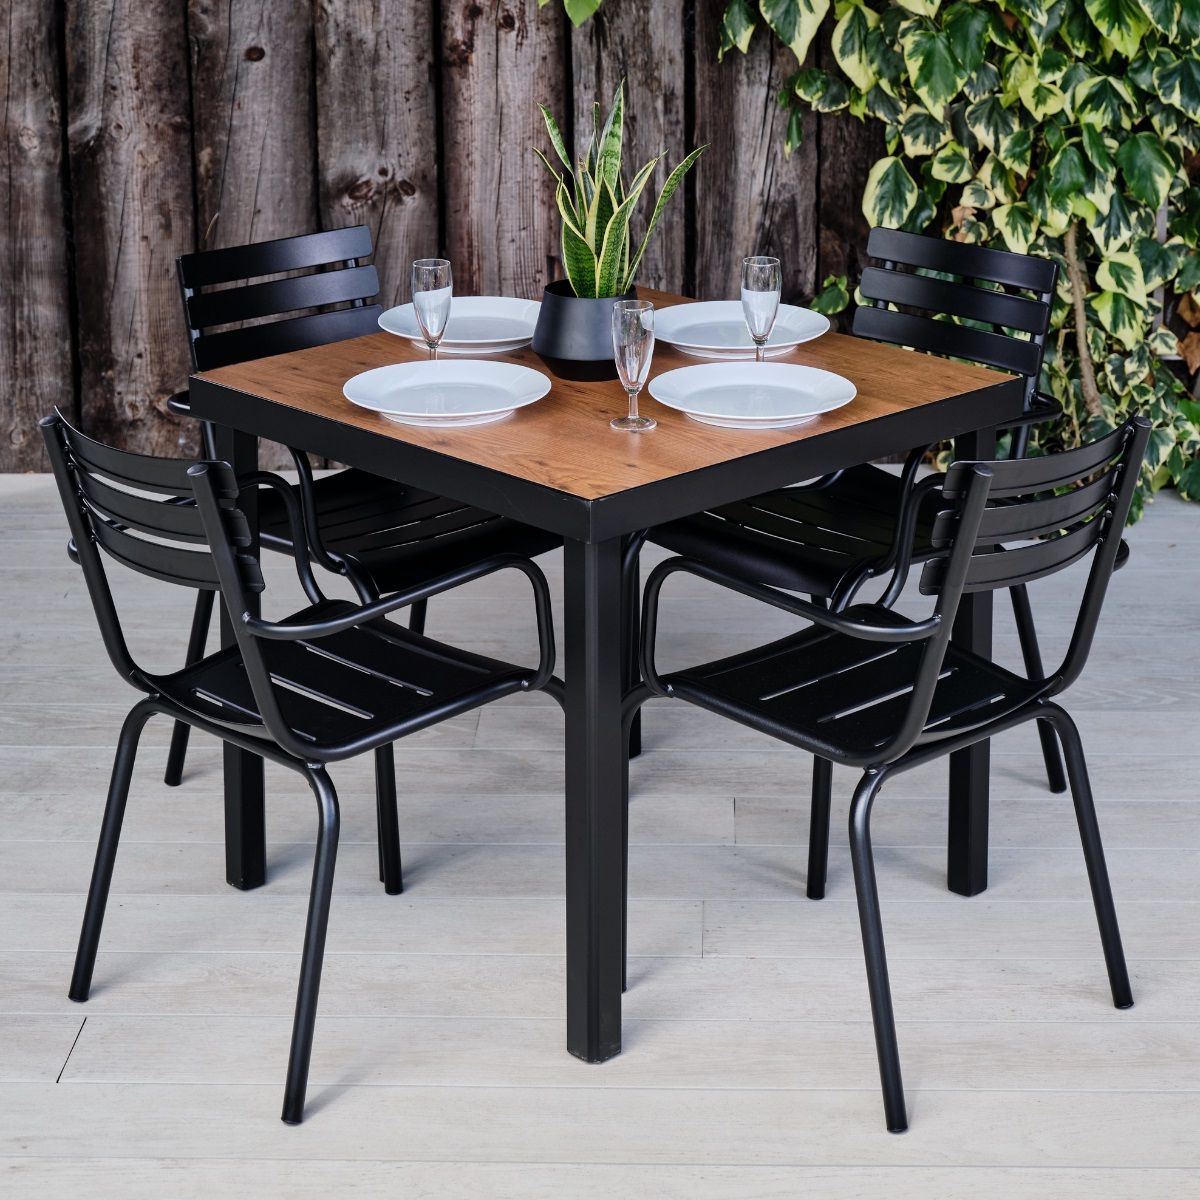 Metal And Wood Outdoor Tables Intended For Widely Used Black Metal & Wood Effect Table And 4 Chairs Set – Camden Range – Woodberry (View 8 of 15)